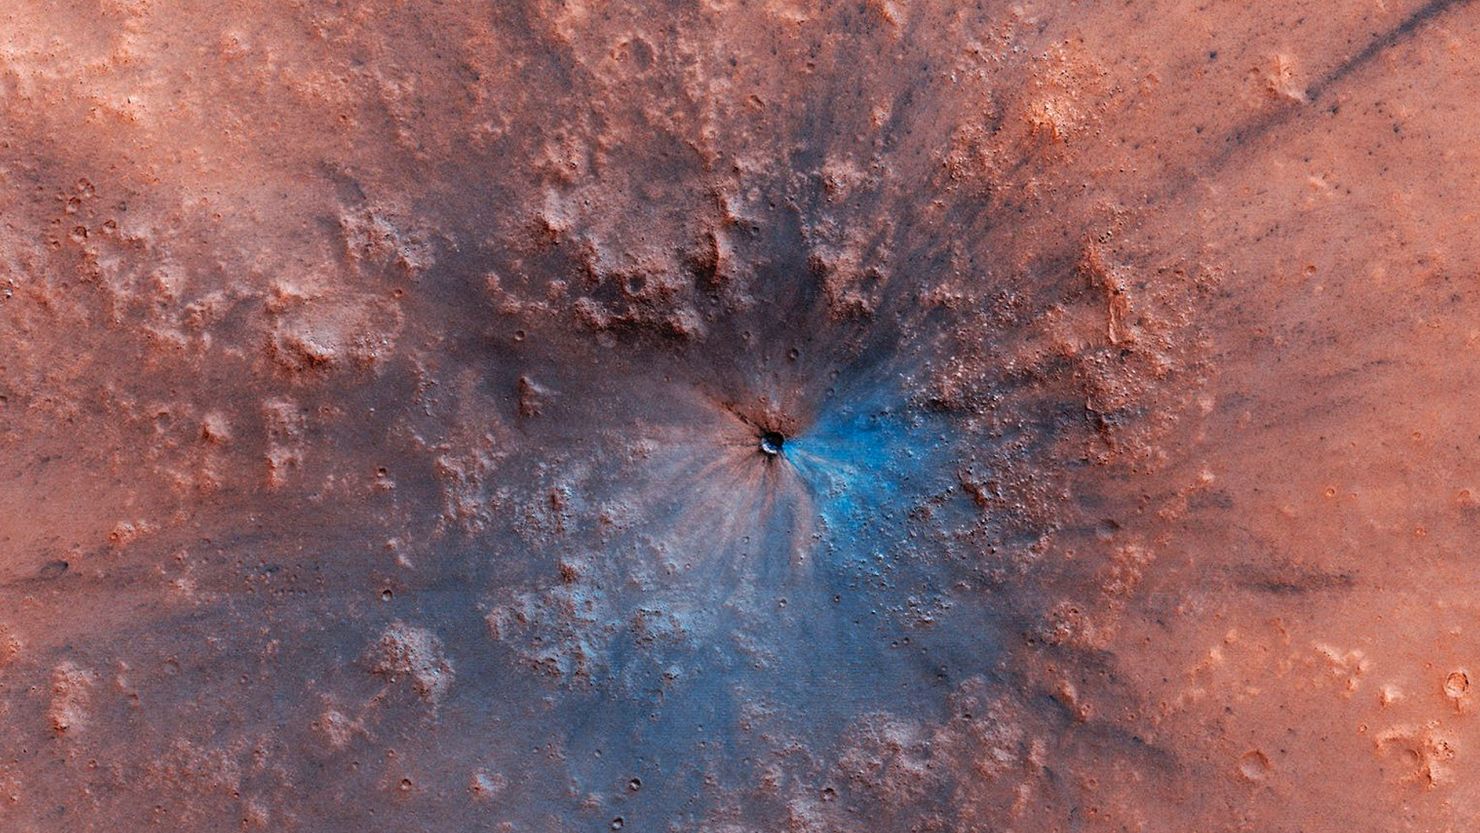 The impact crater likely formed between September 2016 and February 2019.